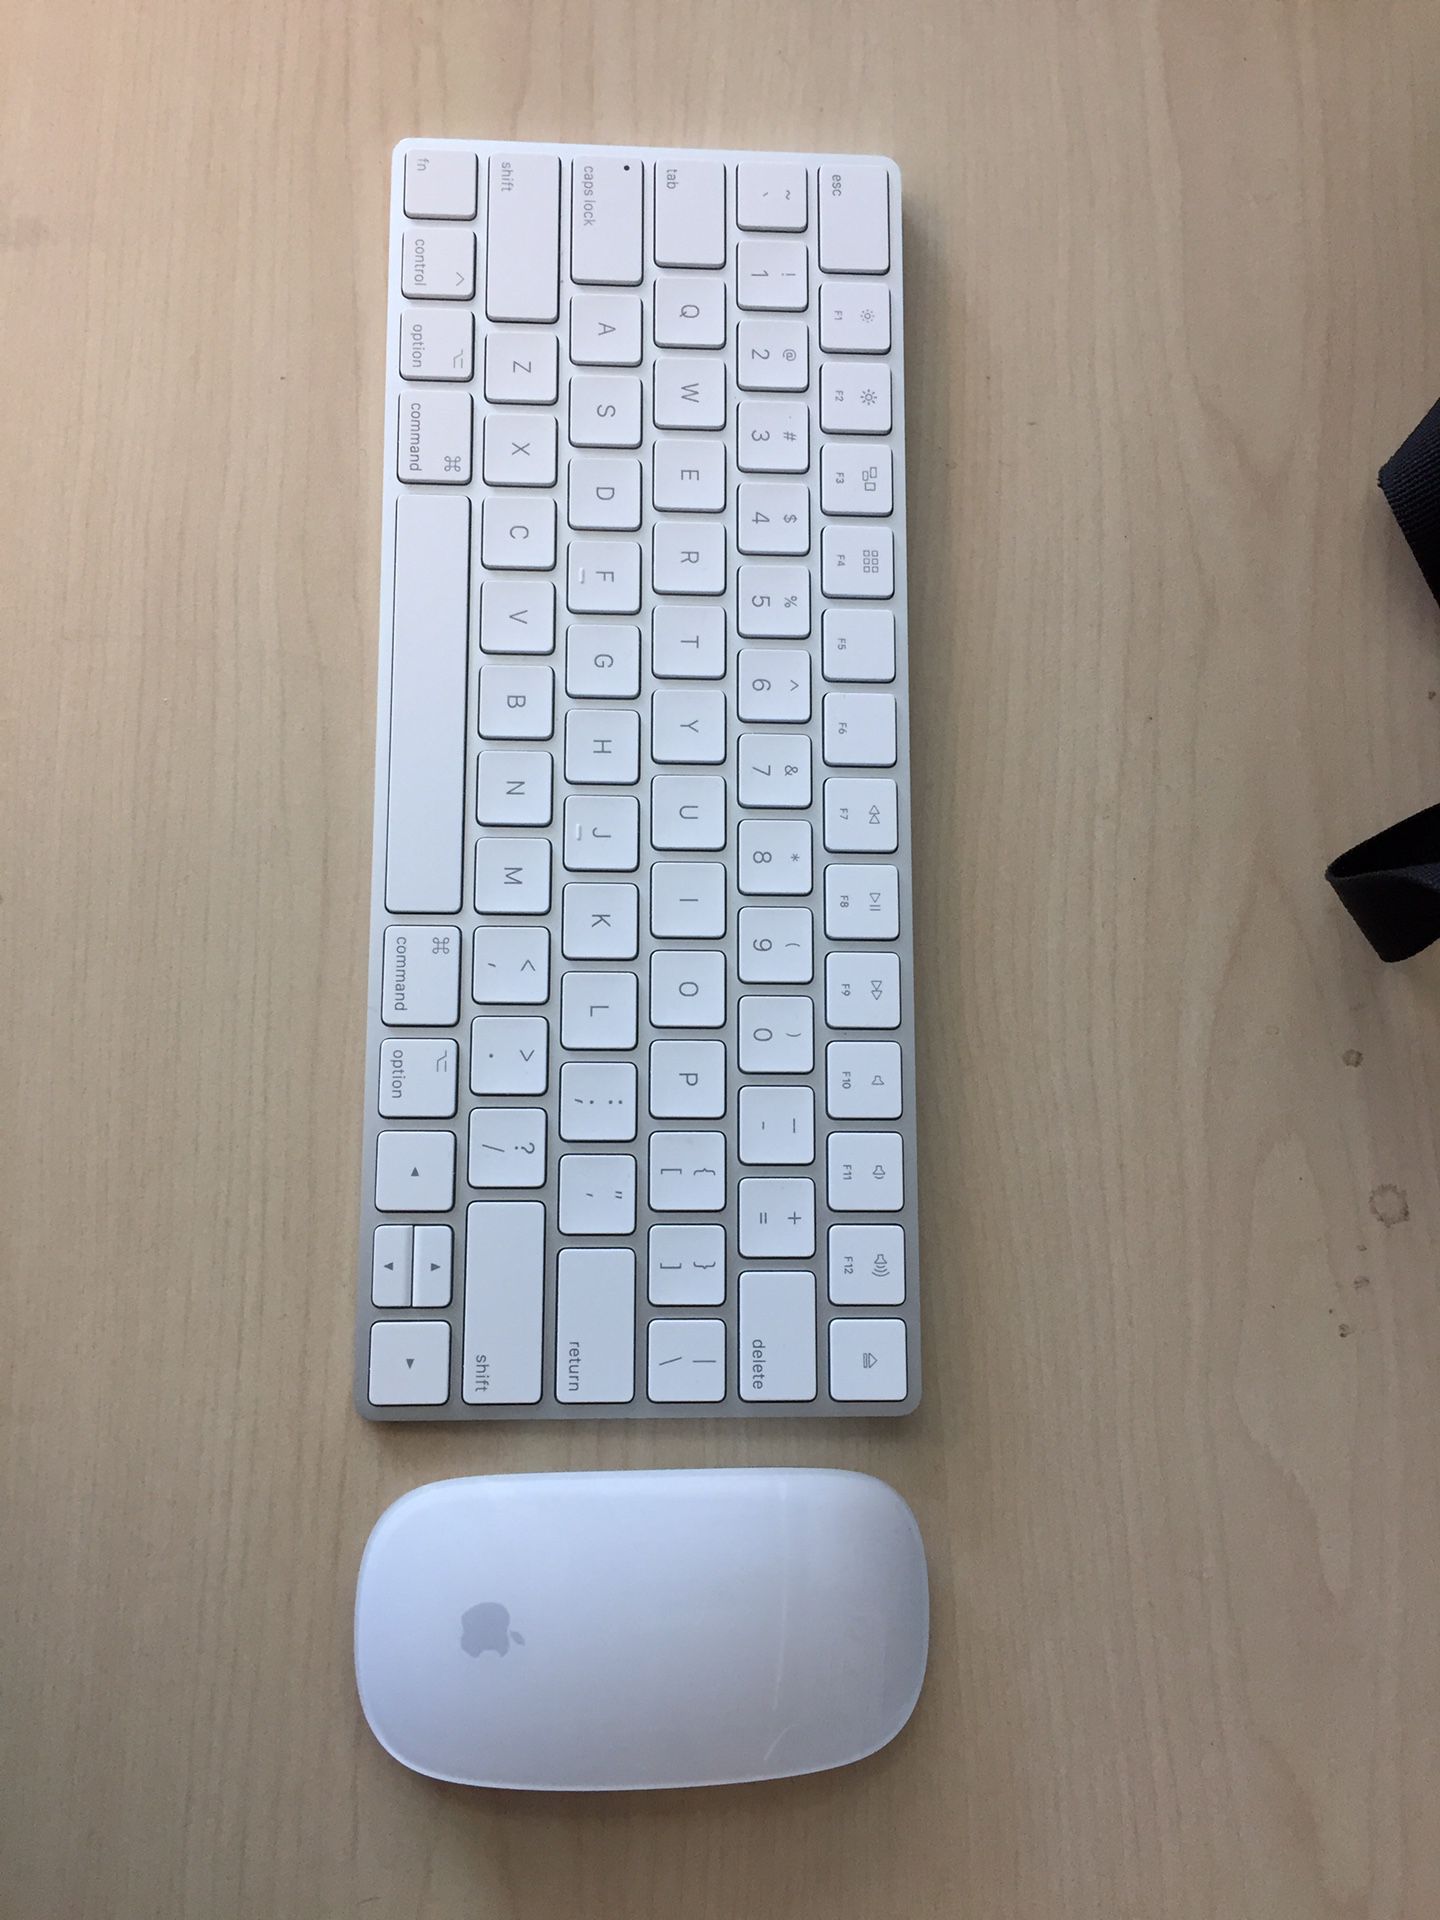 Apple magic 2 keyboard and mouse, like new condition